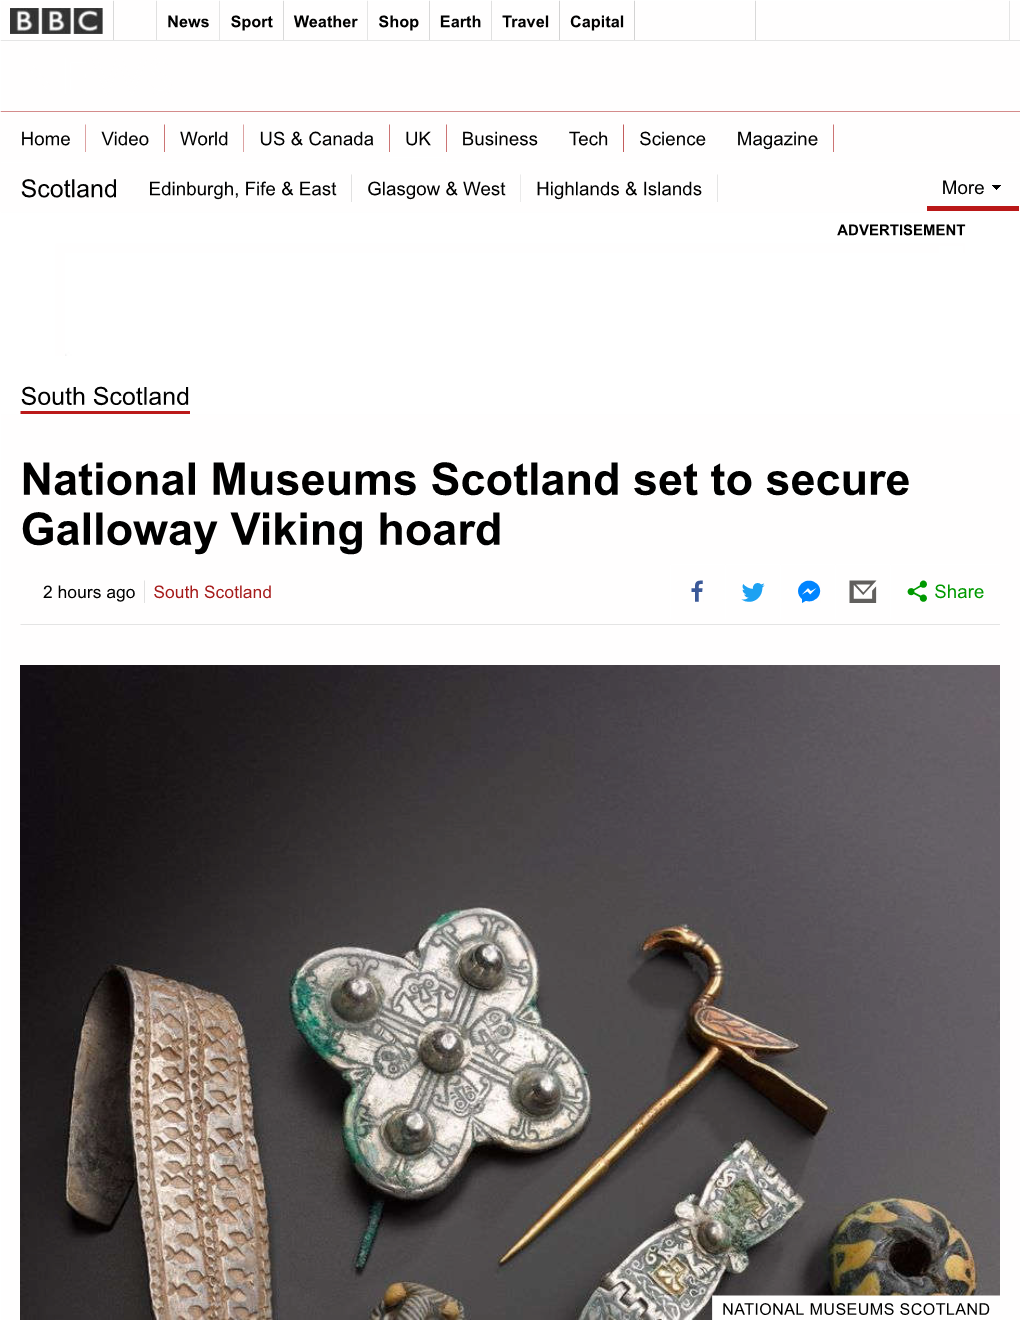 National Museums Scotland Set to Secure Galloway Viking Hoard